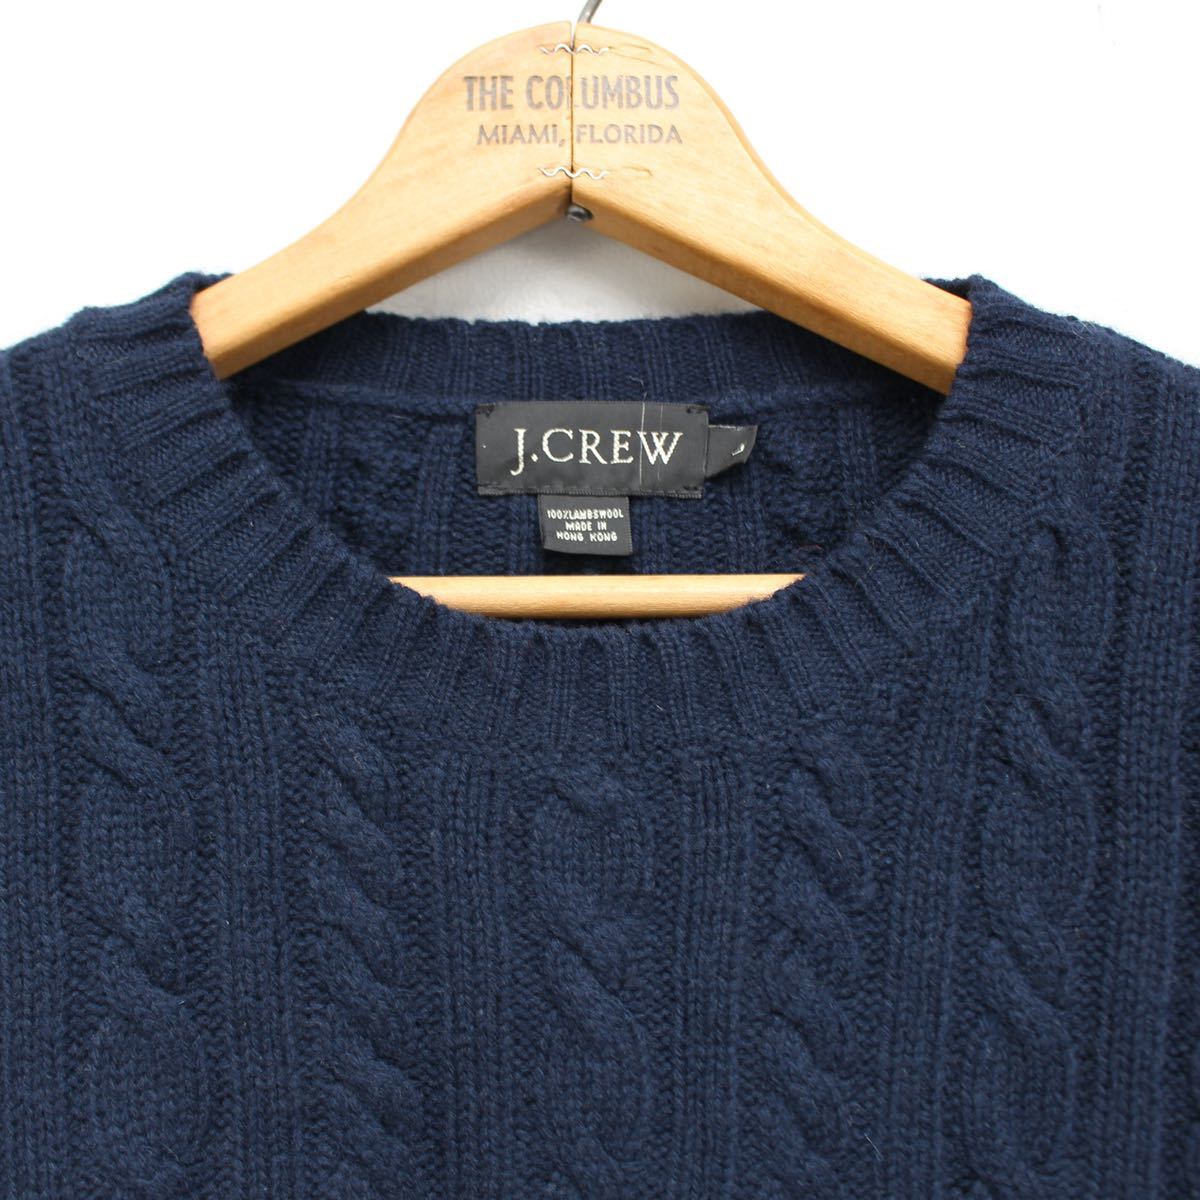 USA VINTAGE J CREW CABLE DESIGN OVER KNIT MADE IN HONGKONG